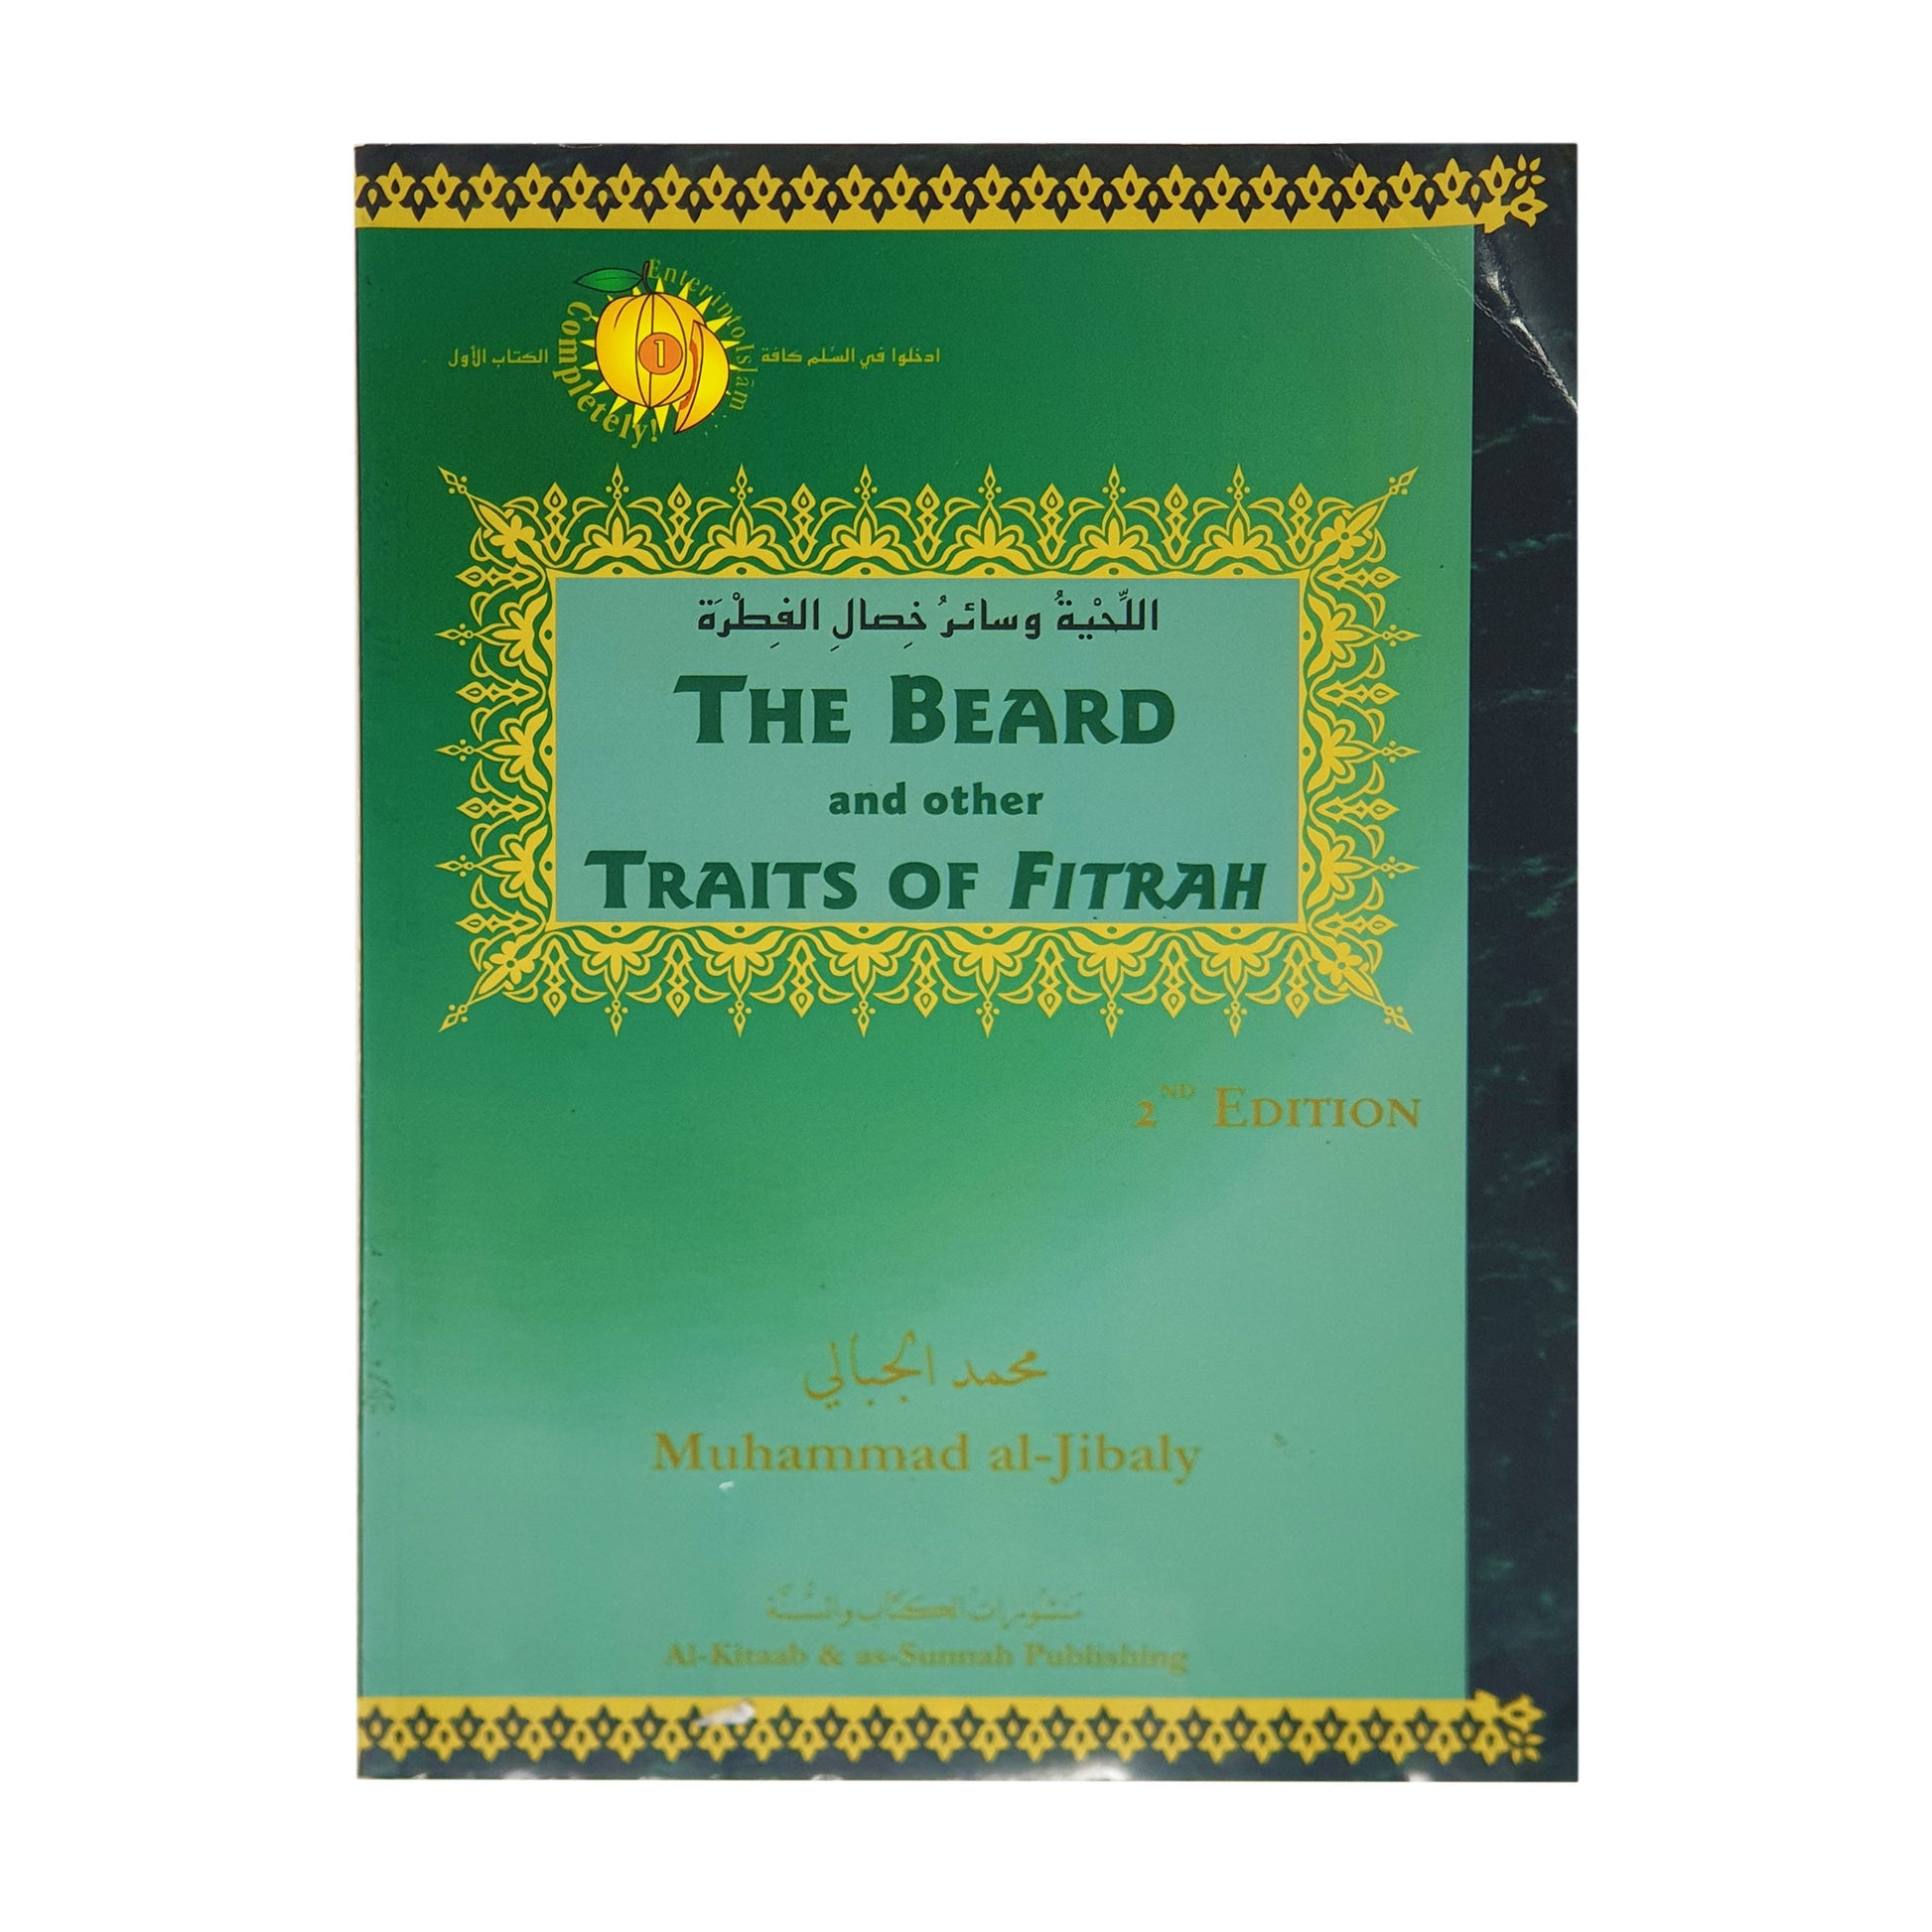 The Beard and other Traits of Fitrah